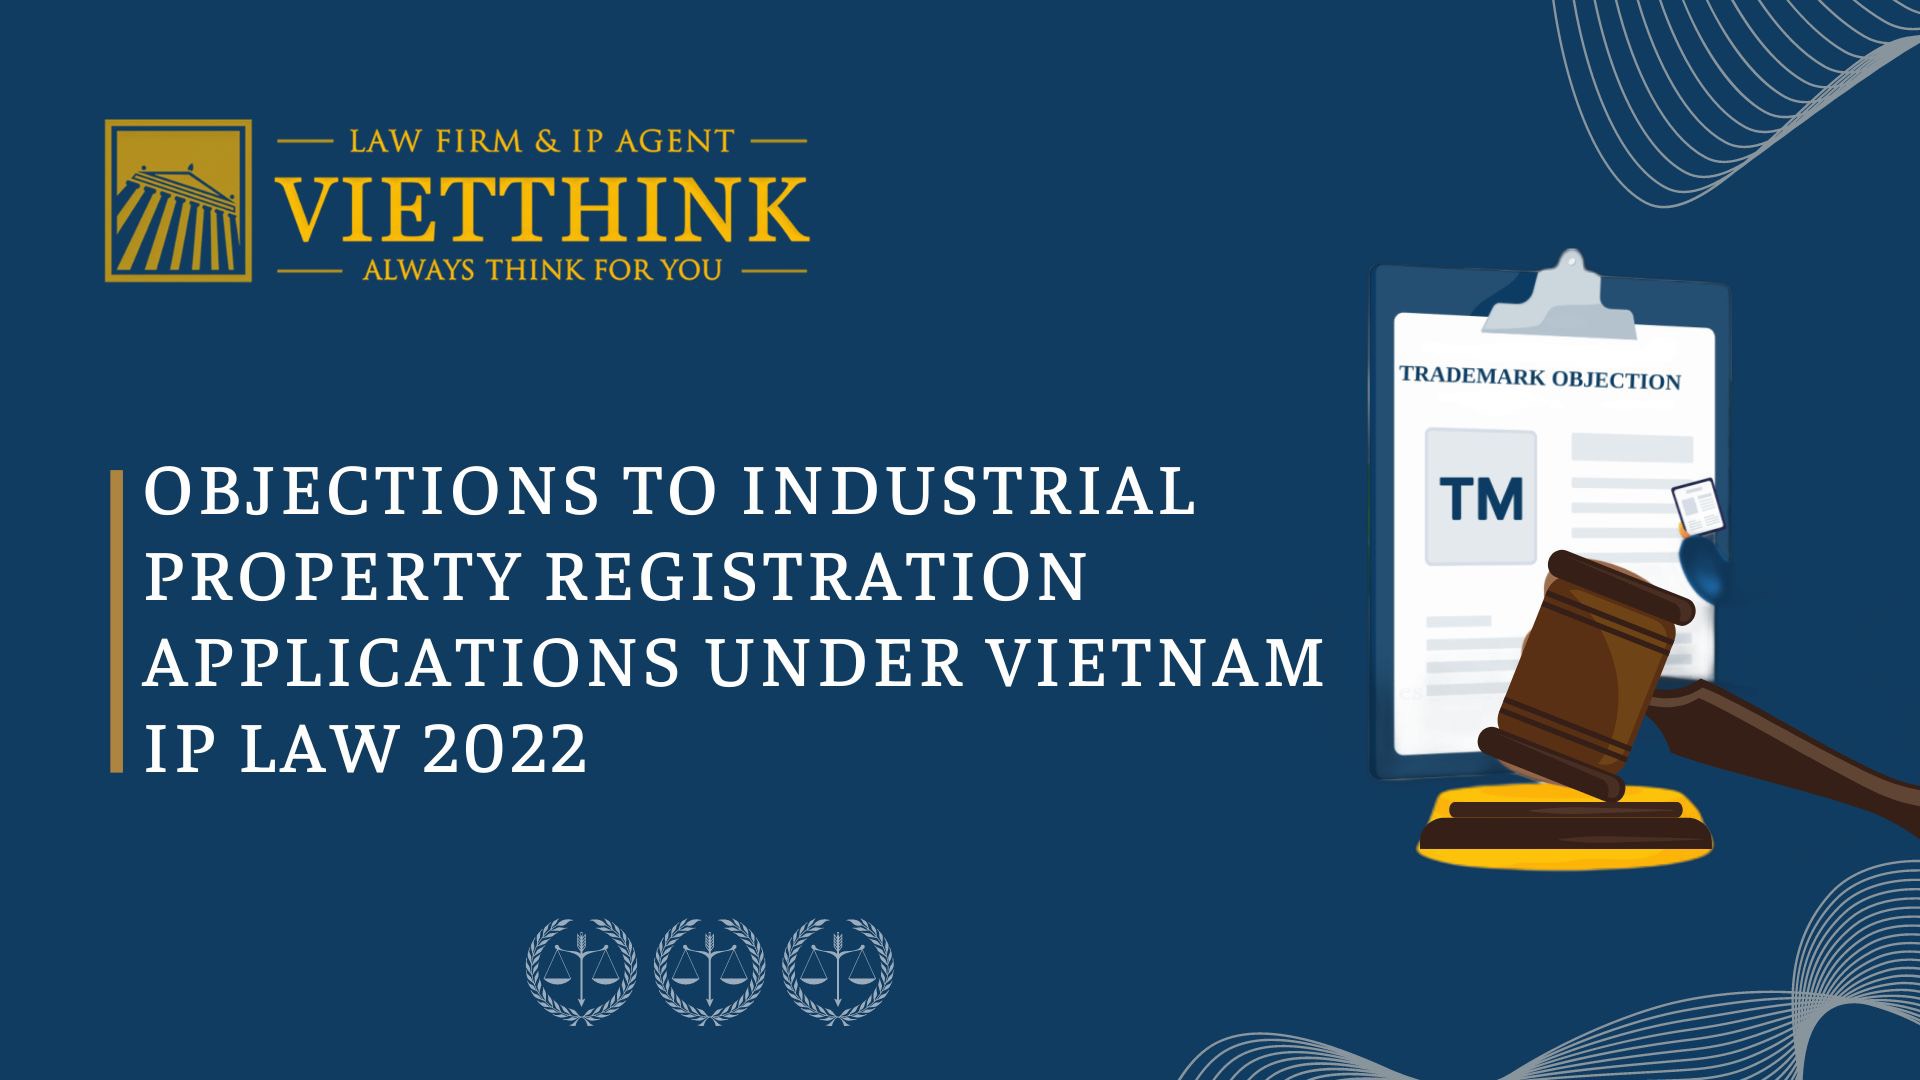 Objections to industrial property registration applications under Vietnam IP Law 2022